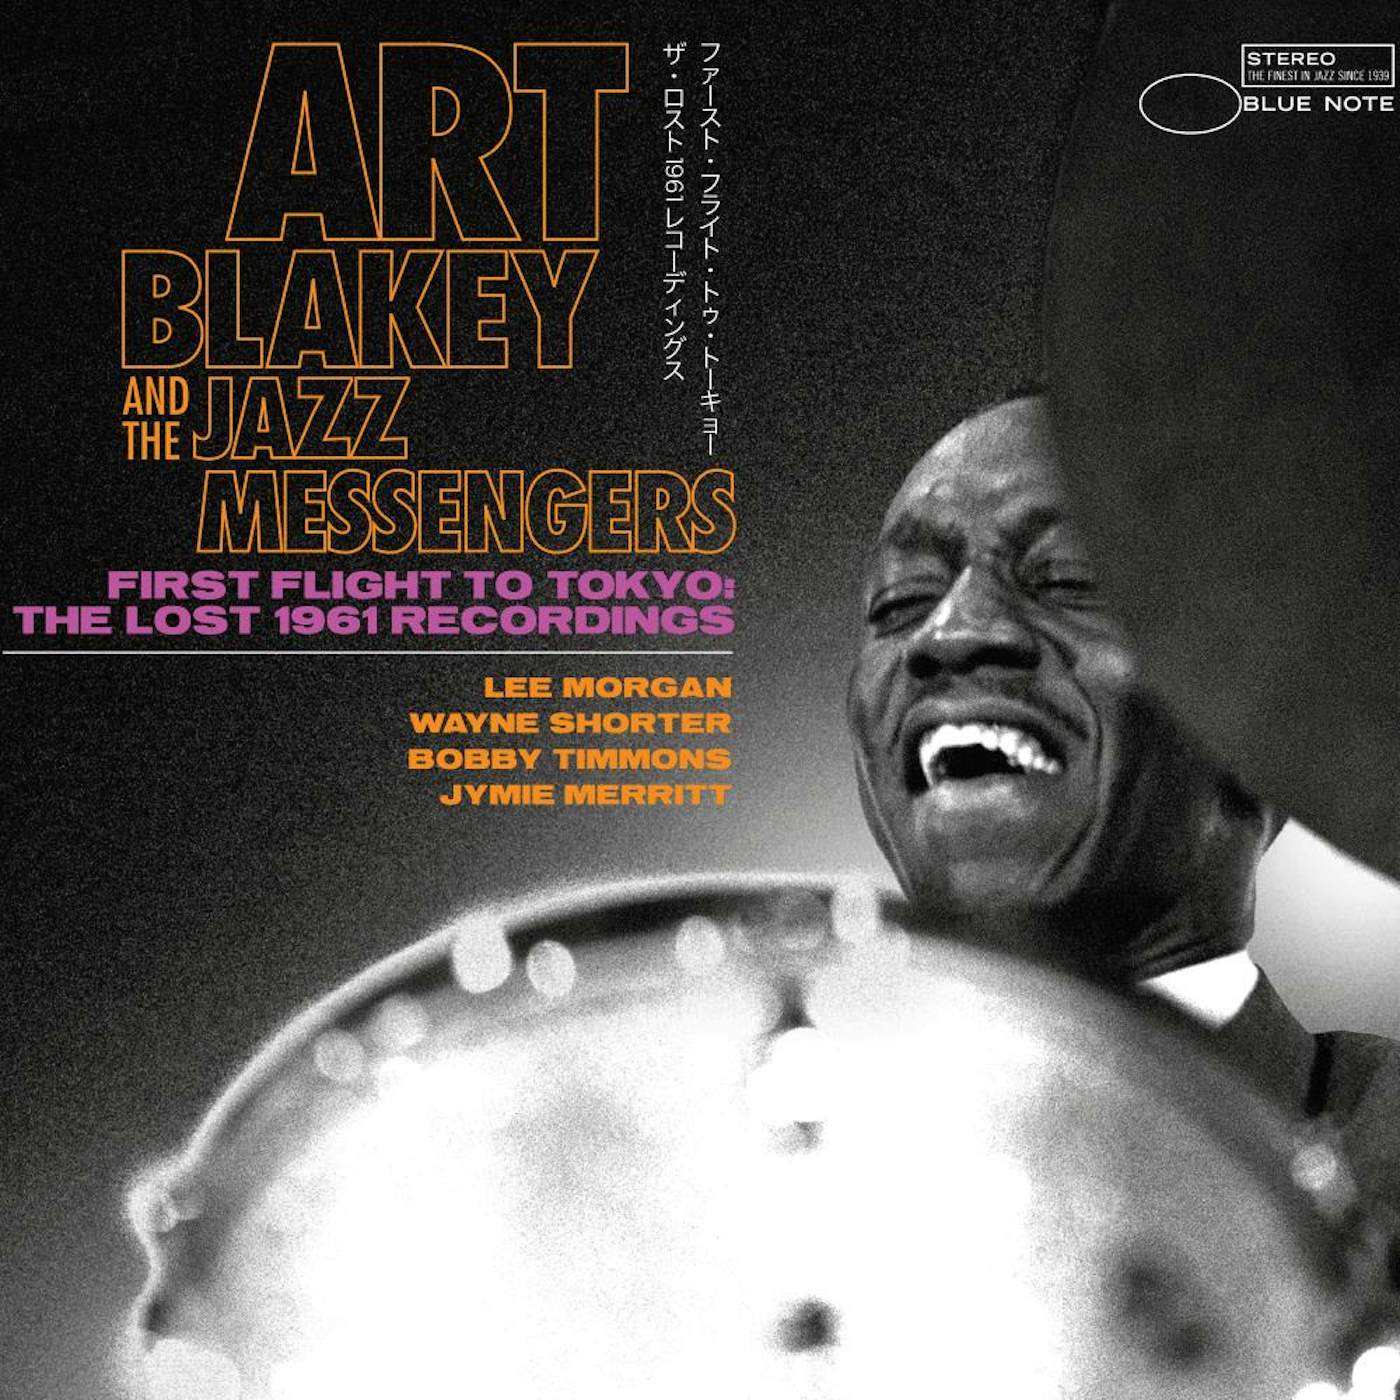 Art Blakey & The Jazz Messengers FIRST FLIGHT TO TOKYO: THE LOST 1961 RECORDINGS (2CD) CD